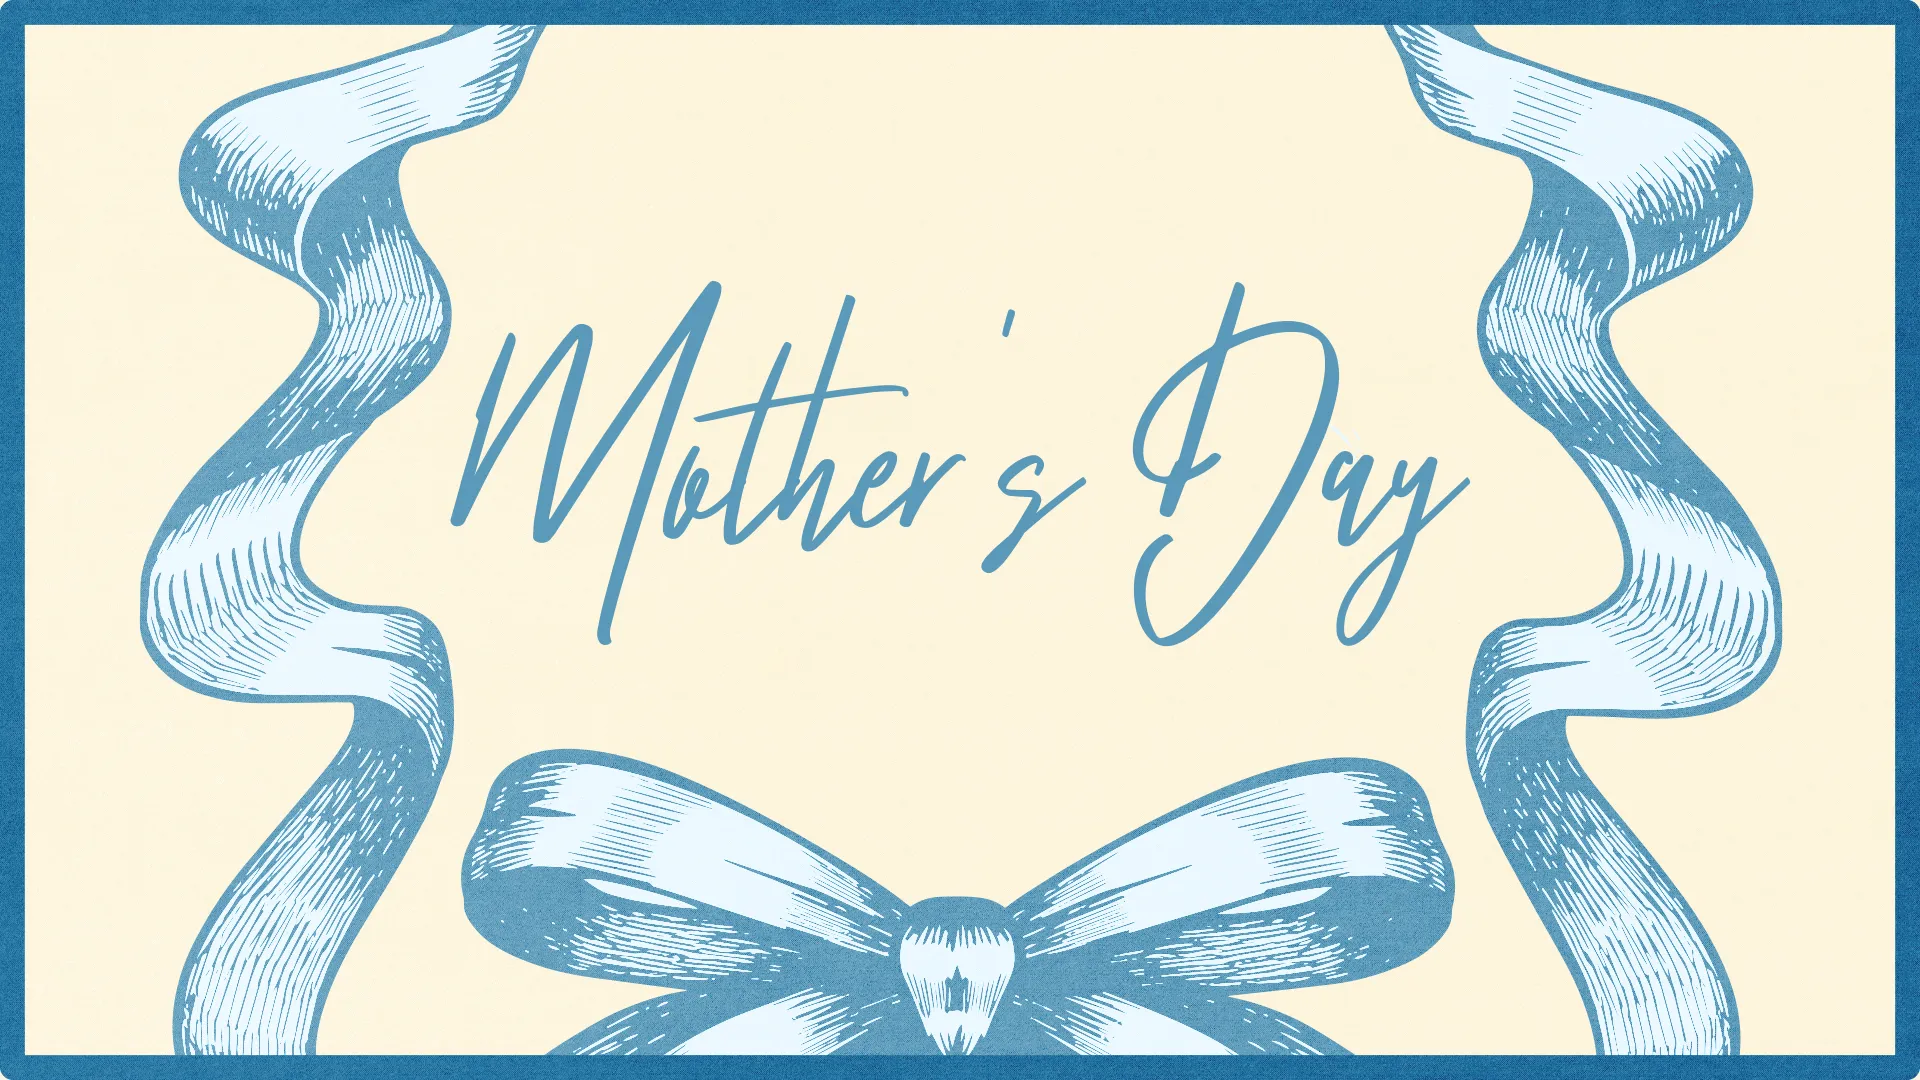 Express Your Appreciation For Mothers With This Classic 'Mother'S Day' Graphic, Adorned With Elegant Ribbons And Soft Hues. It’s A Warm And Graceful Choice For Church Media Celebrating Motherhood.